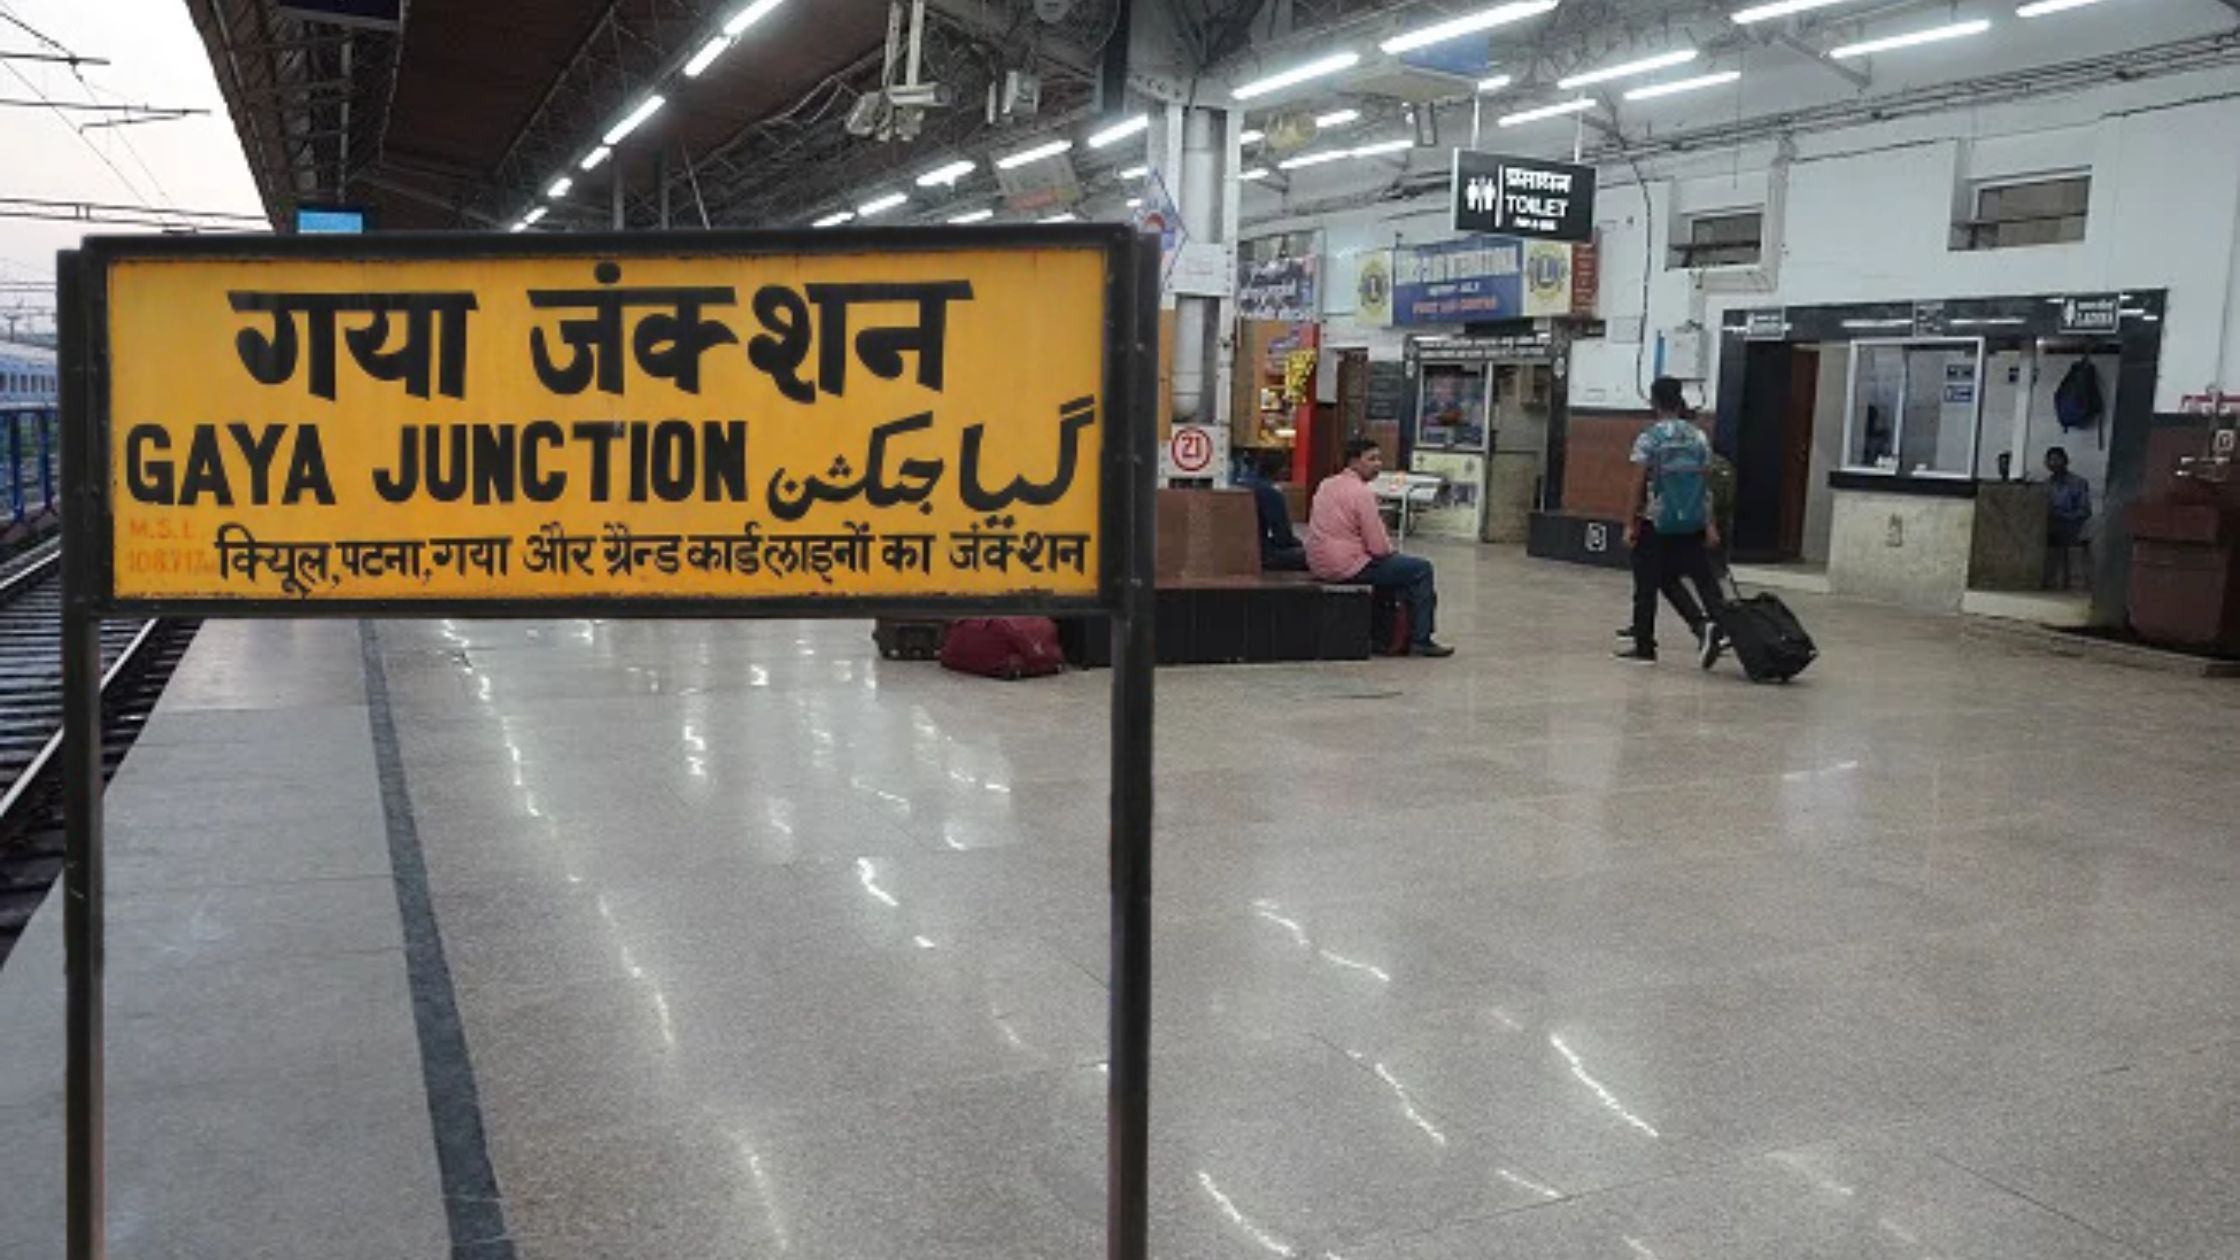 Gaya junction will become like airport